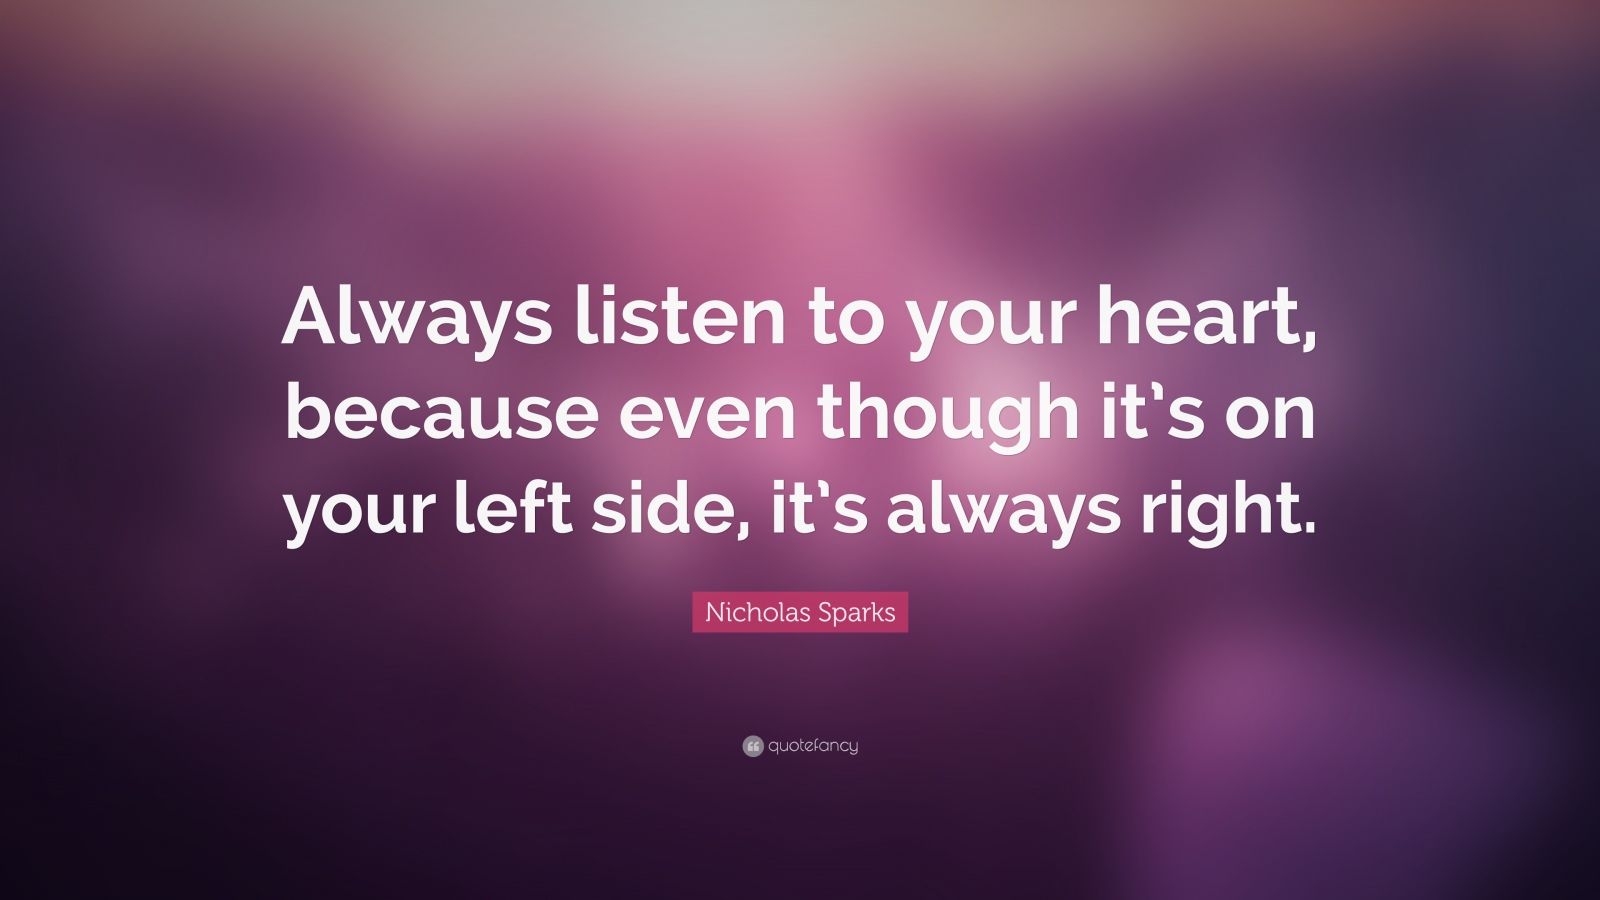 Nicholas Sparks Quote: “Always listen to your heart, because even ...